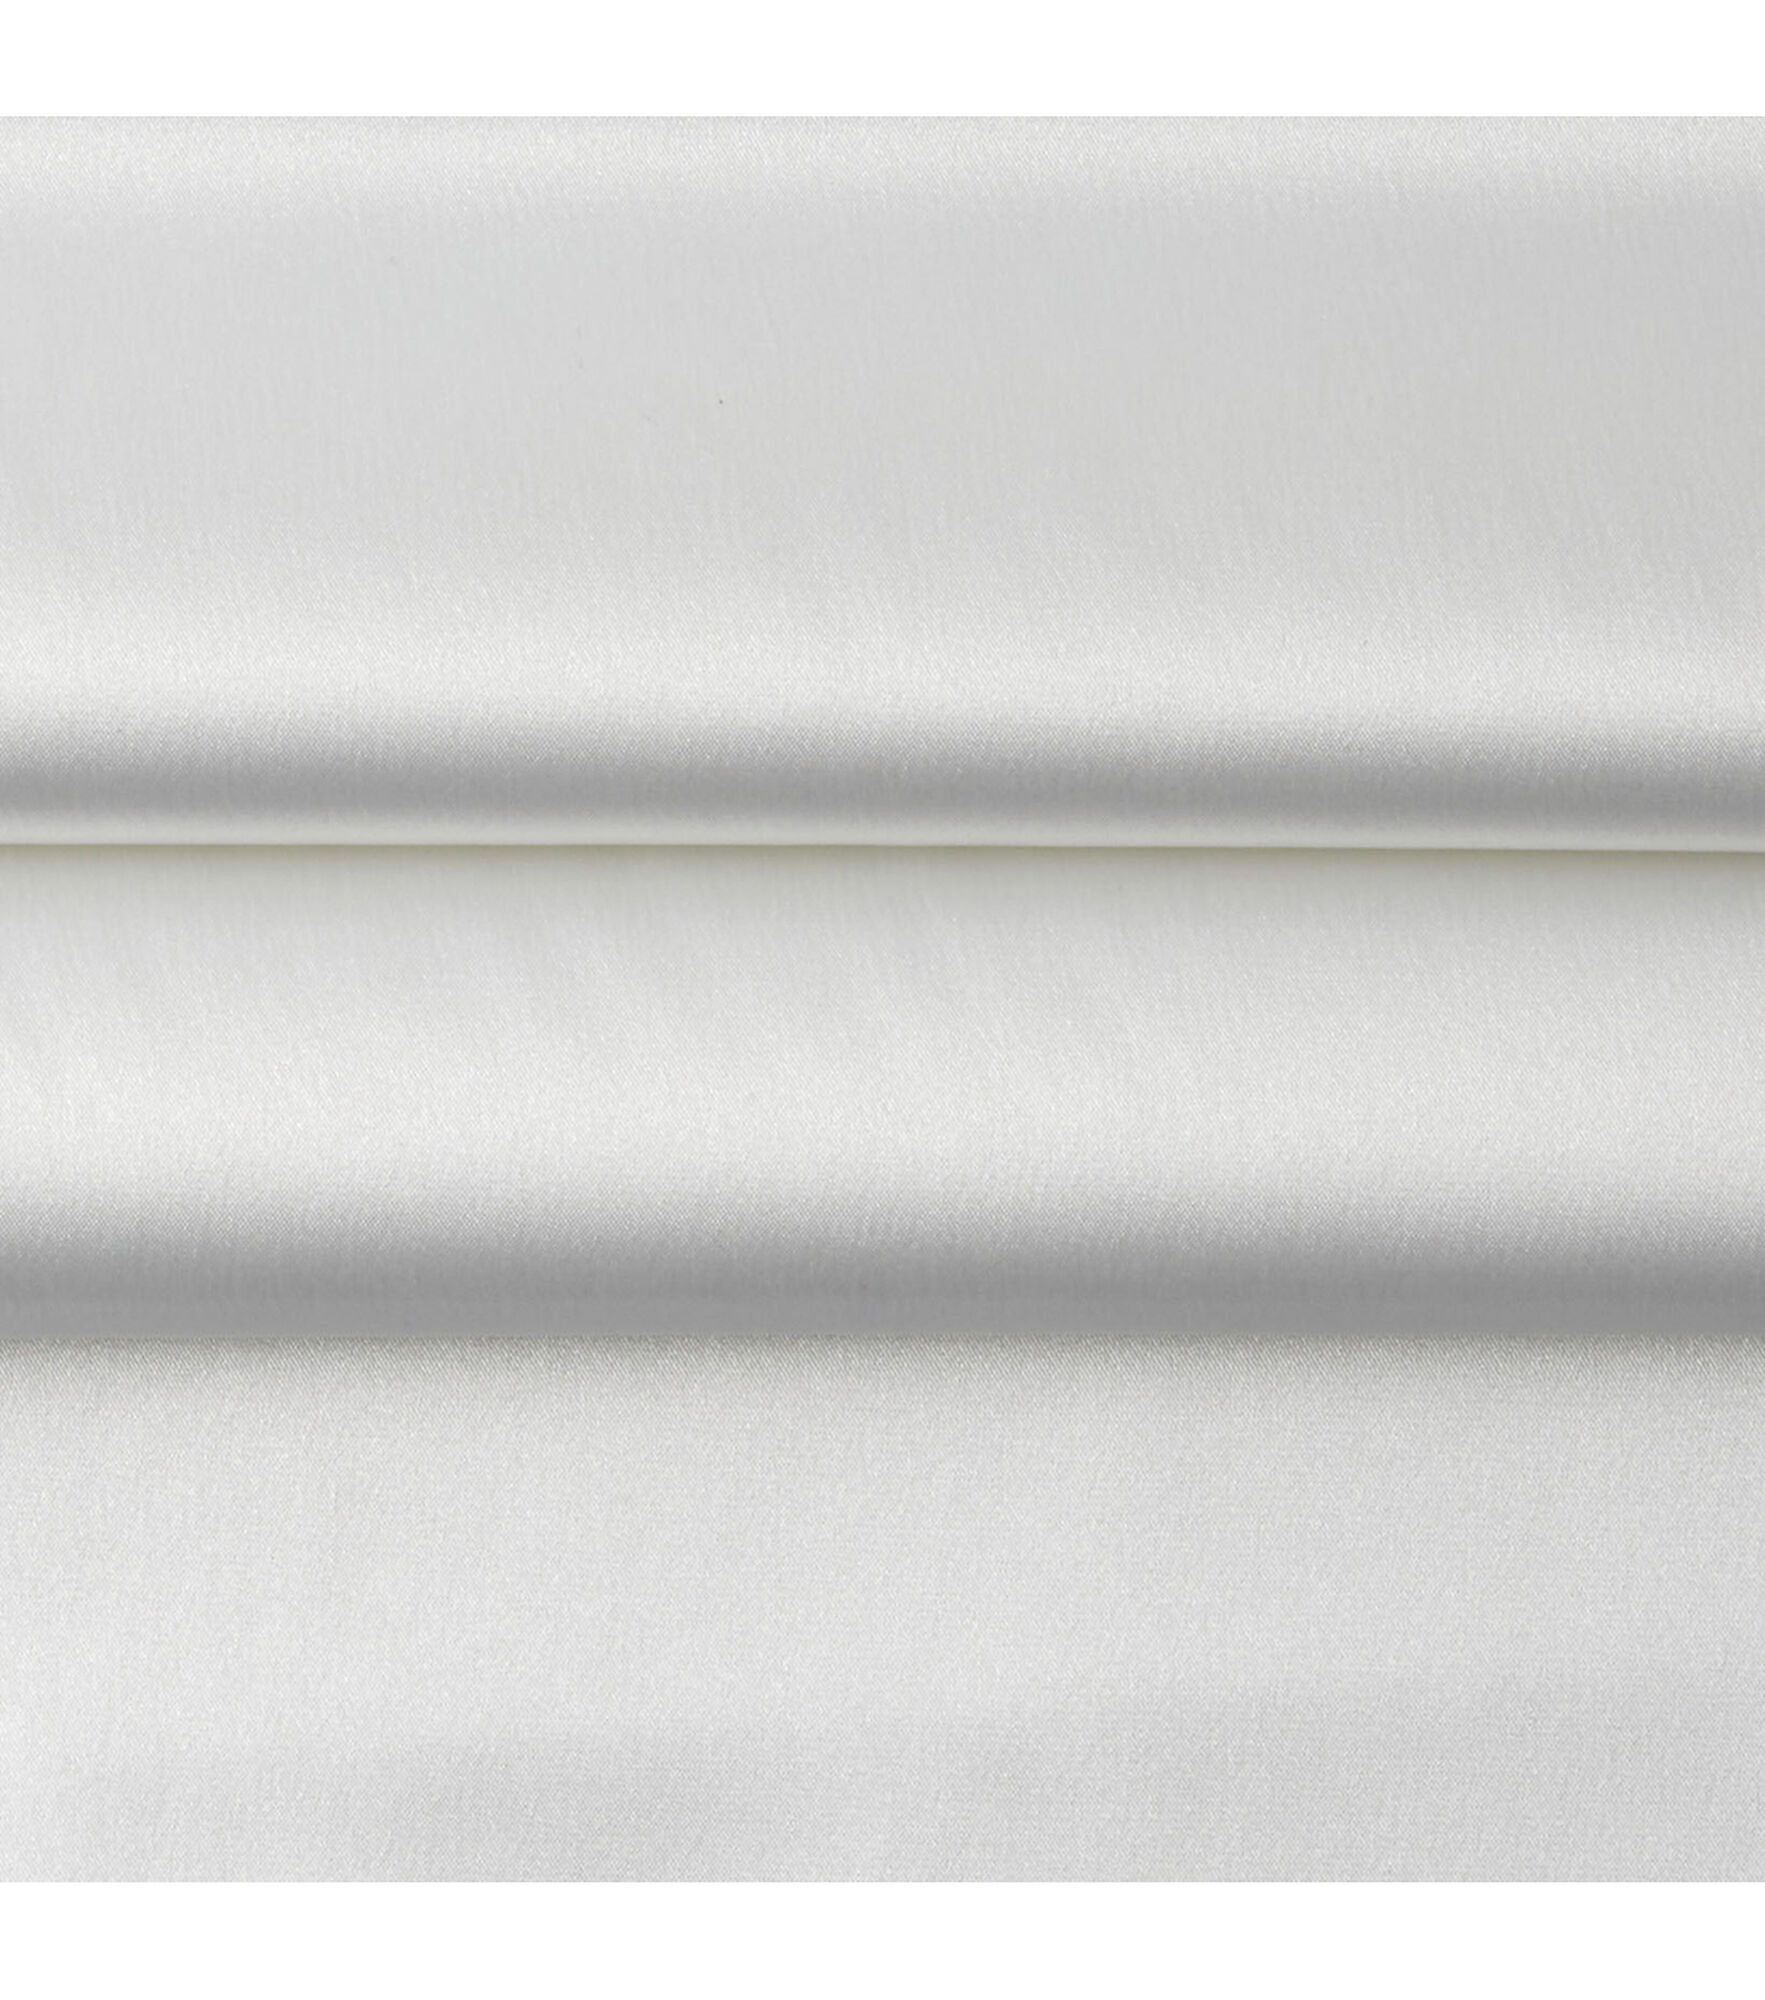 Wholesale Luxe Stretch Matte Satin Fabric White 25 yard bolt